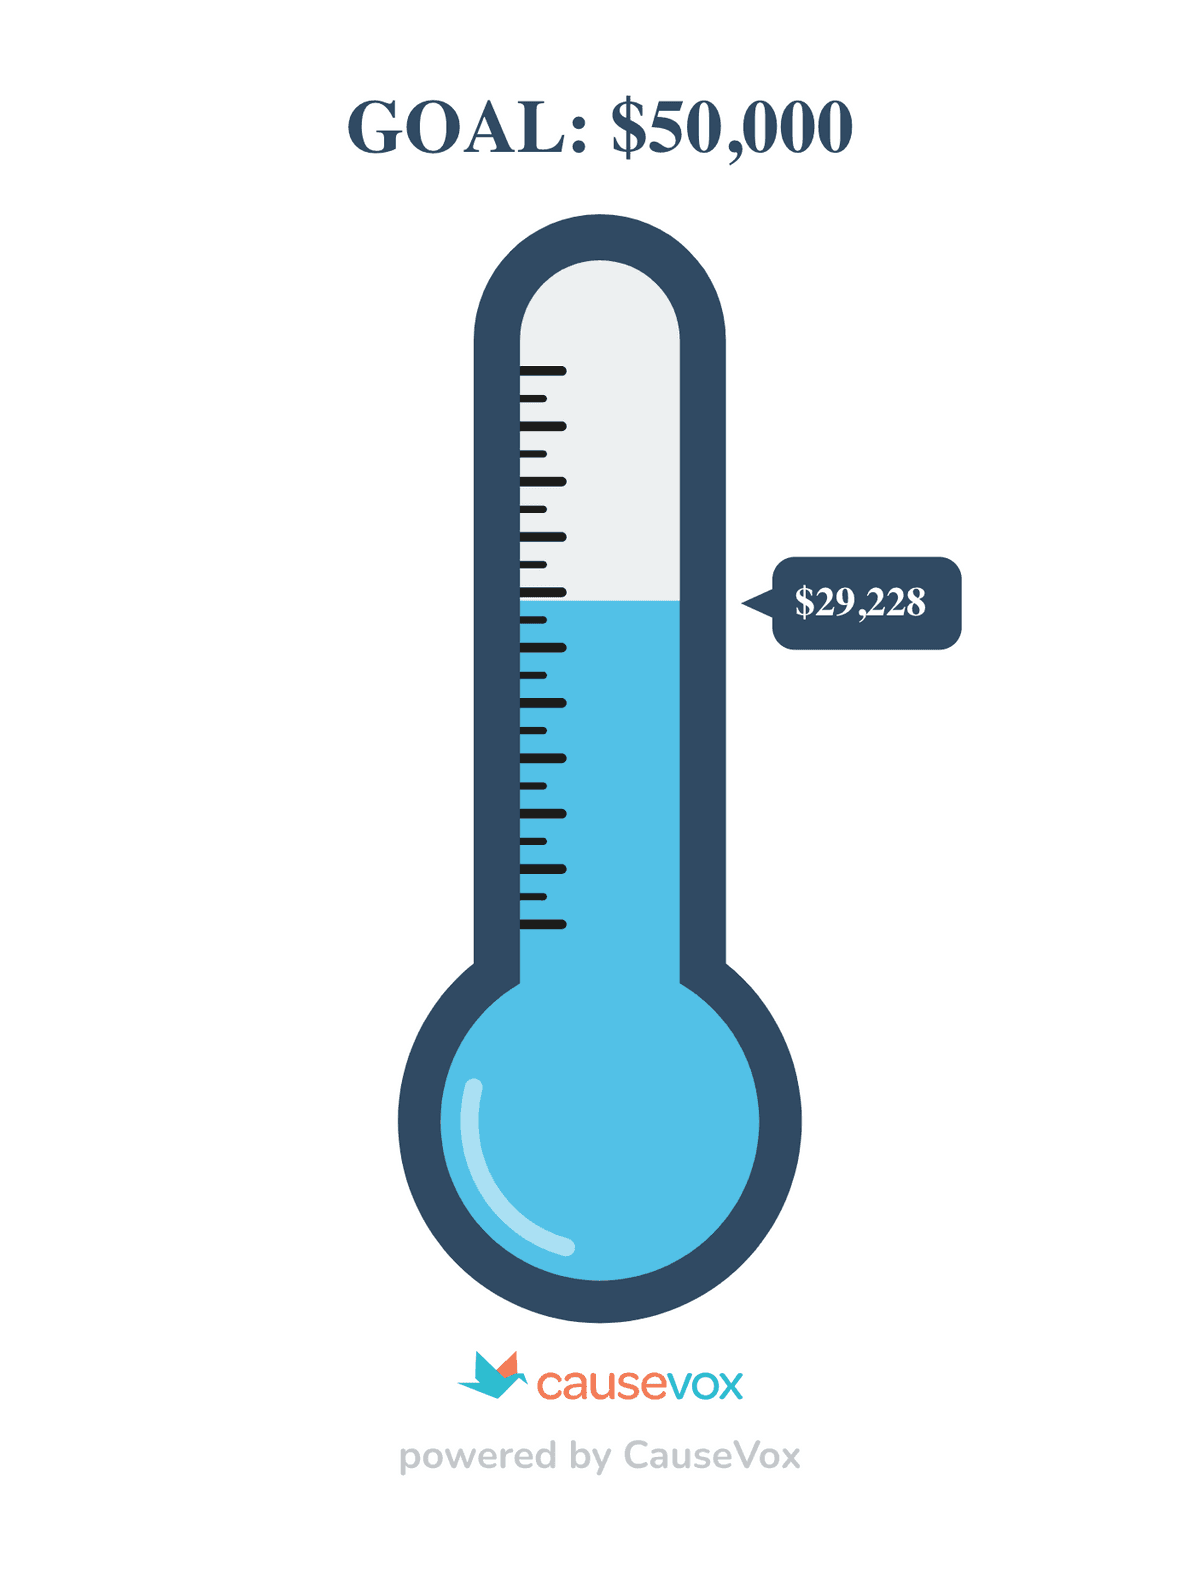 a blue thermometer reflects $29,288 raised towards a $50,000 goal